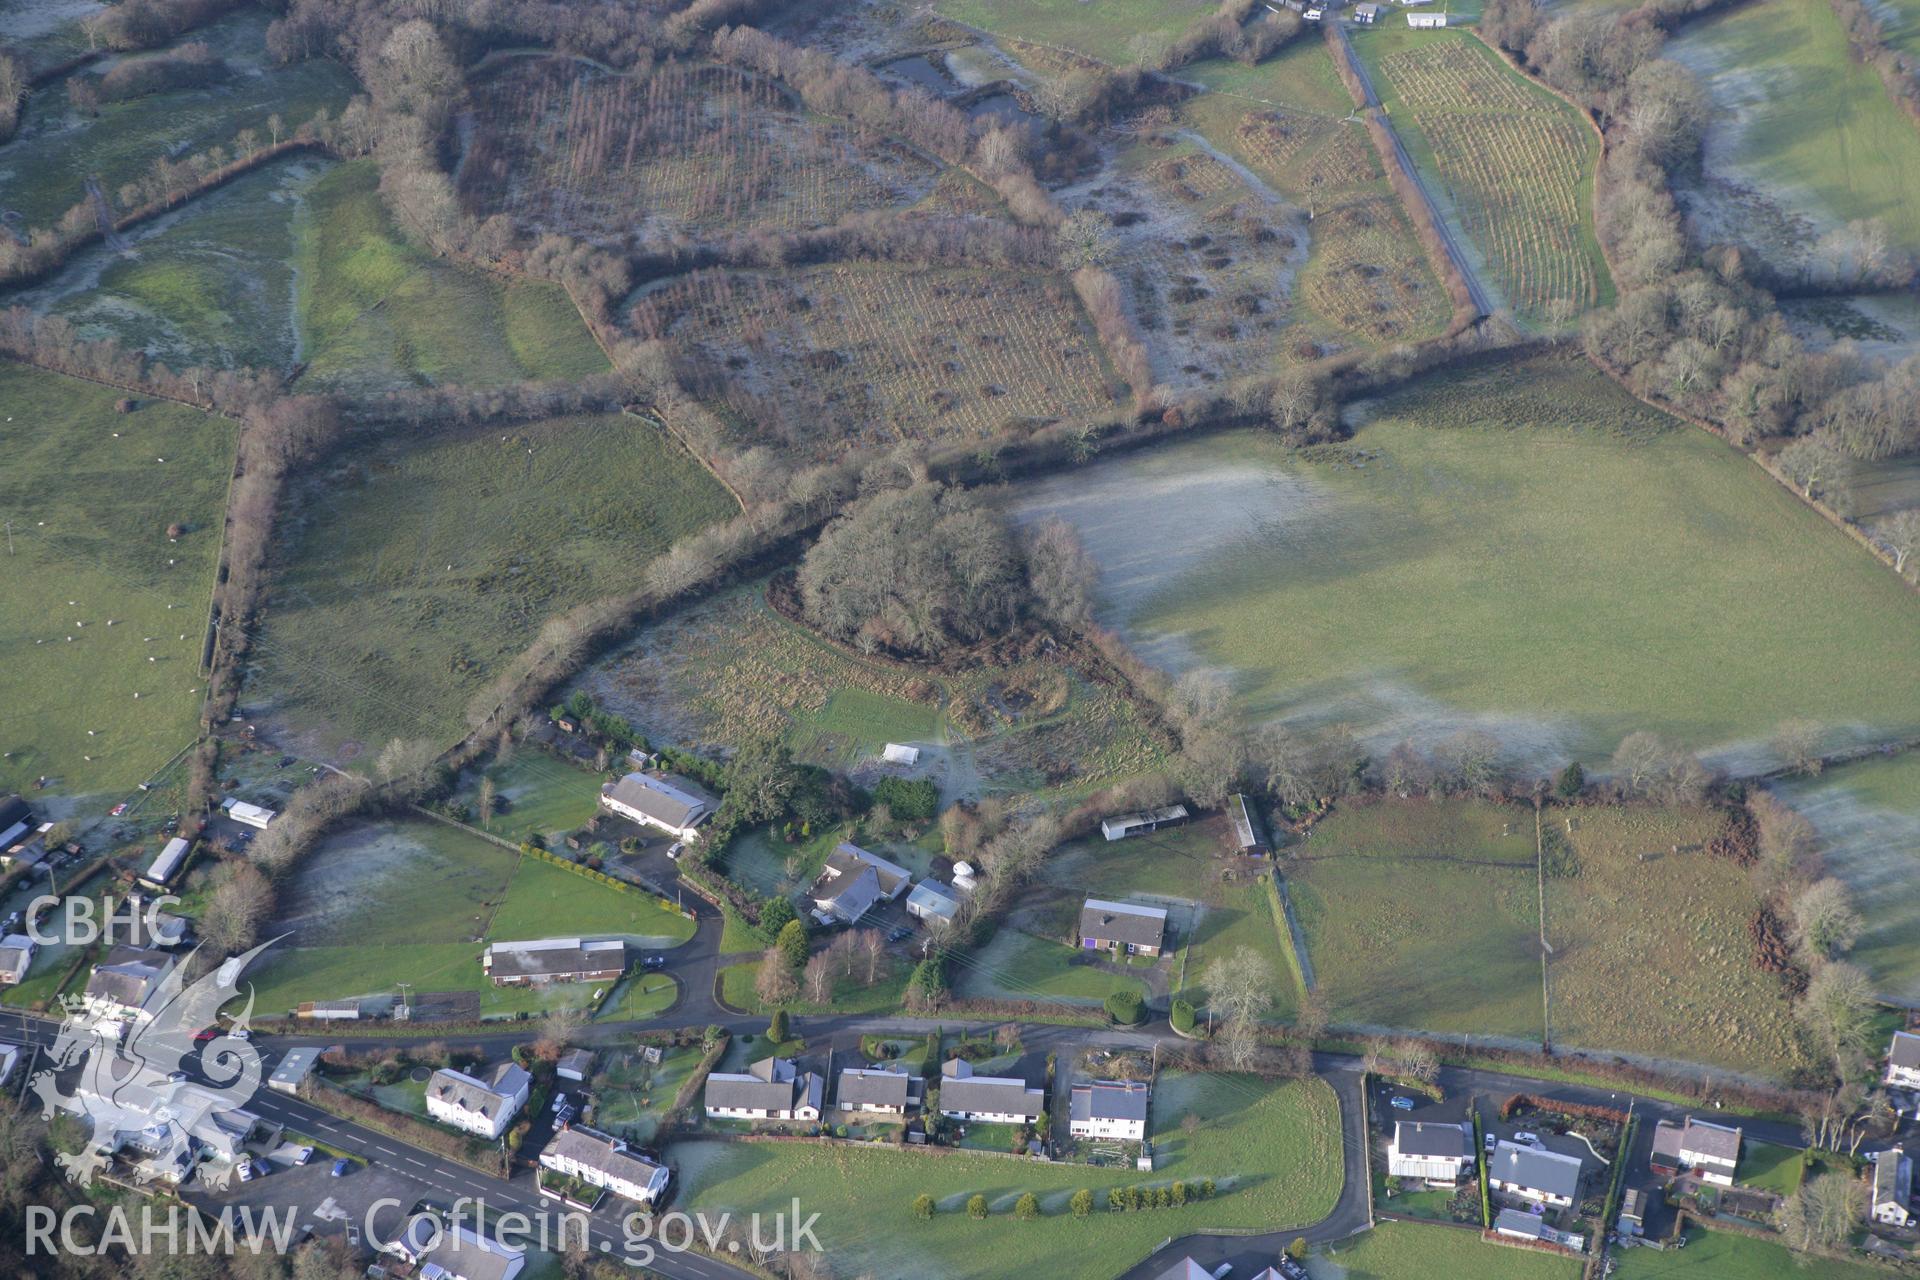 RCAHMW colour oblique photograph of Castell Nant-y-Garan. Taken by Toby Driver on 15/12/2008.